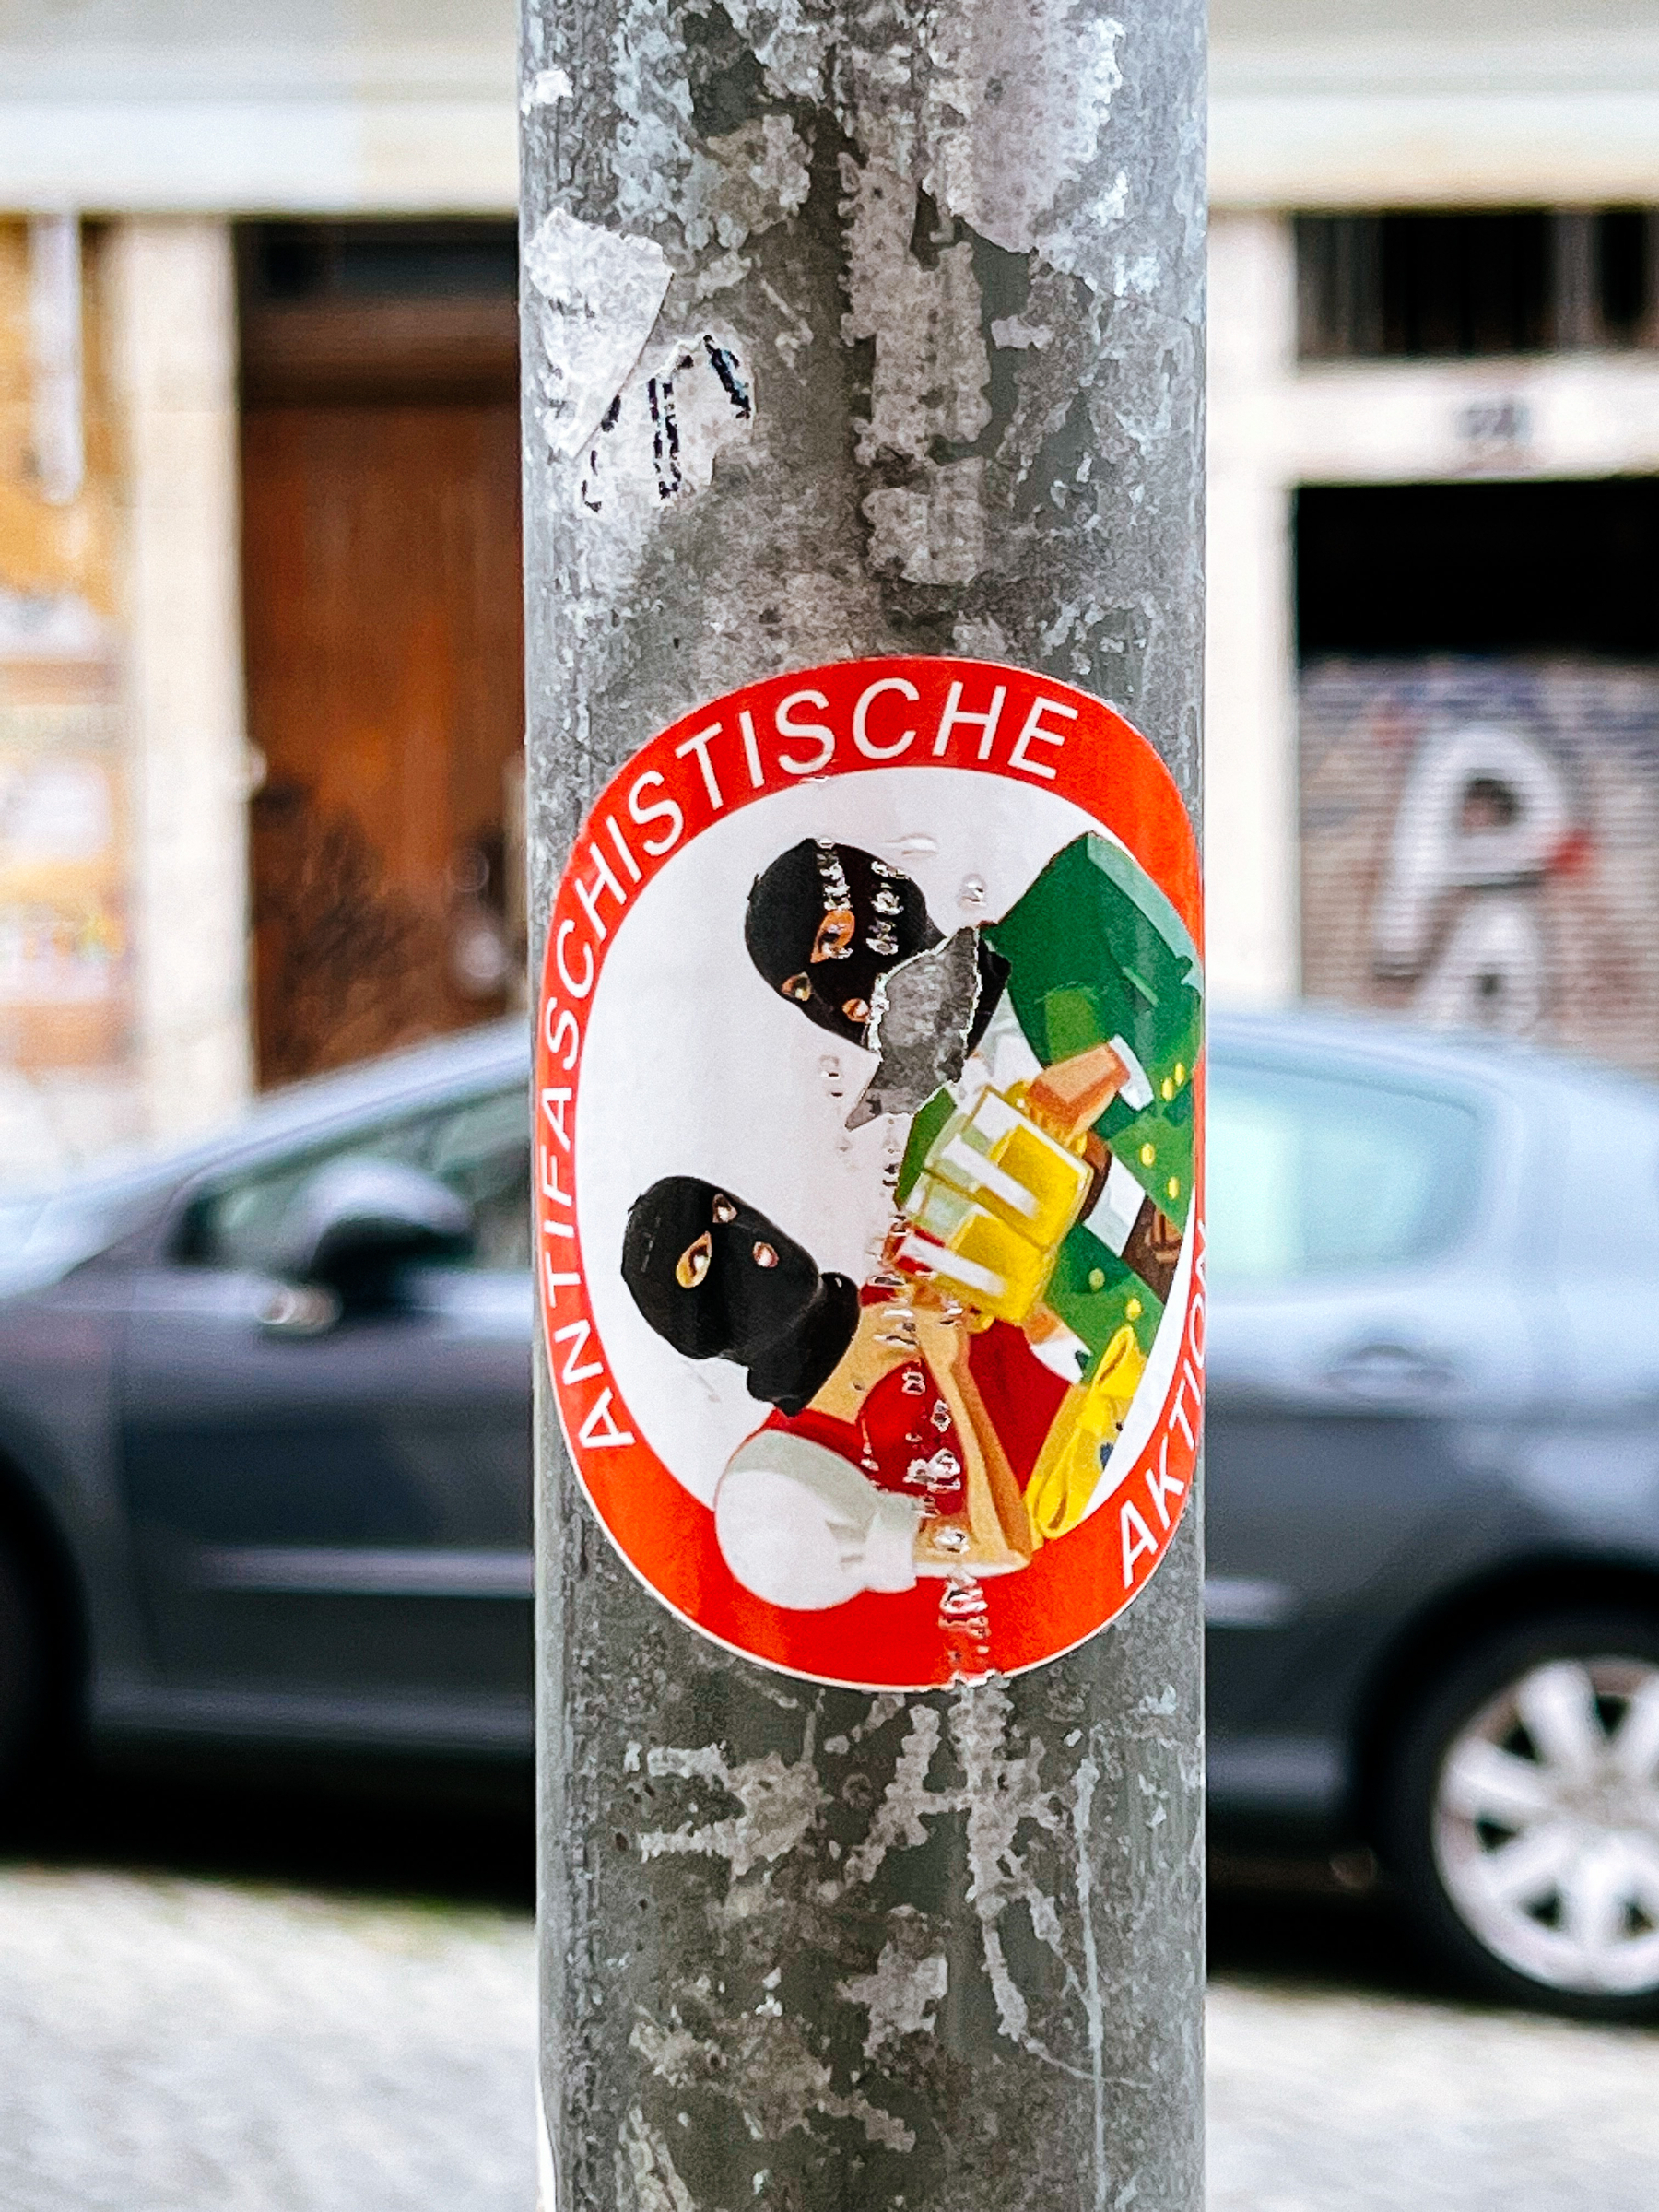 A sticker where a man and a woman toast with beer, both wearing balaclava masks. The word “Antifaschistische” is showing on the edge of the sticker.